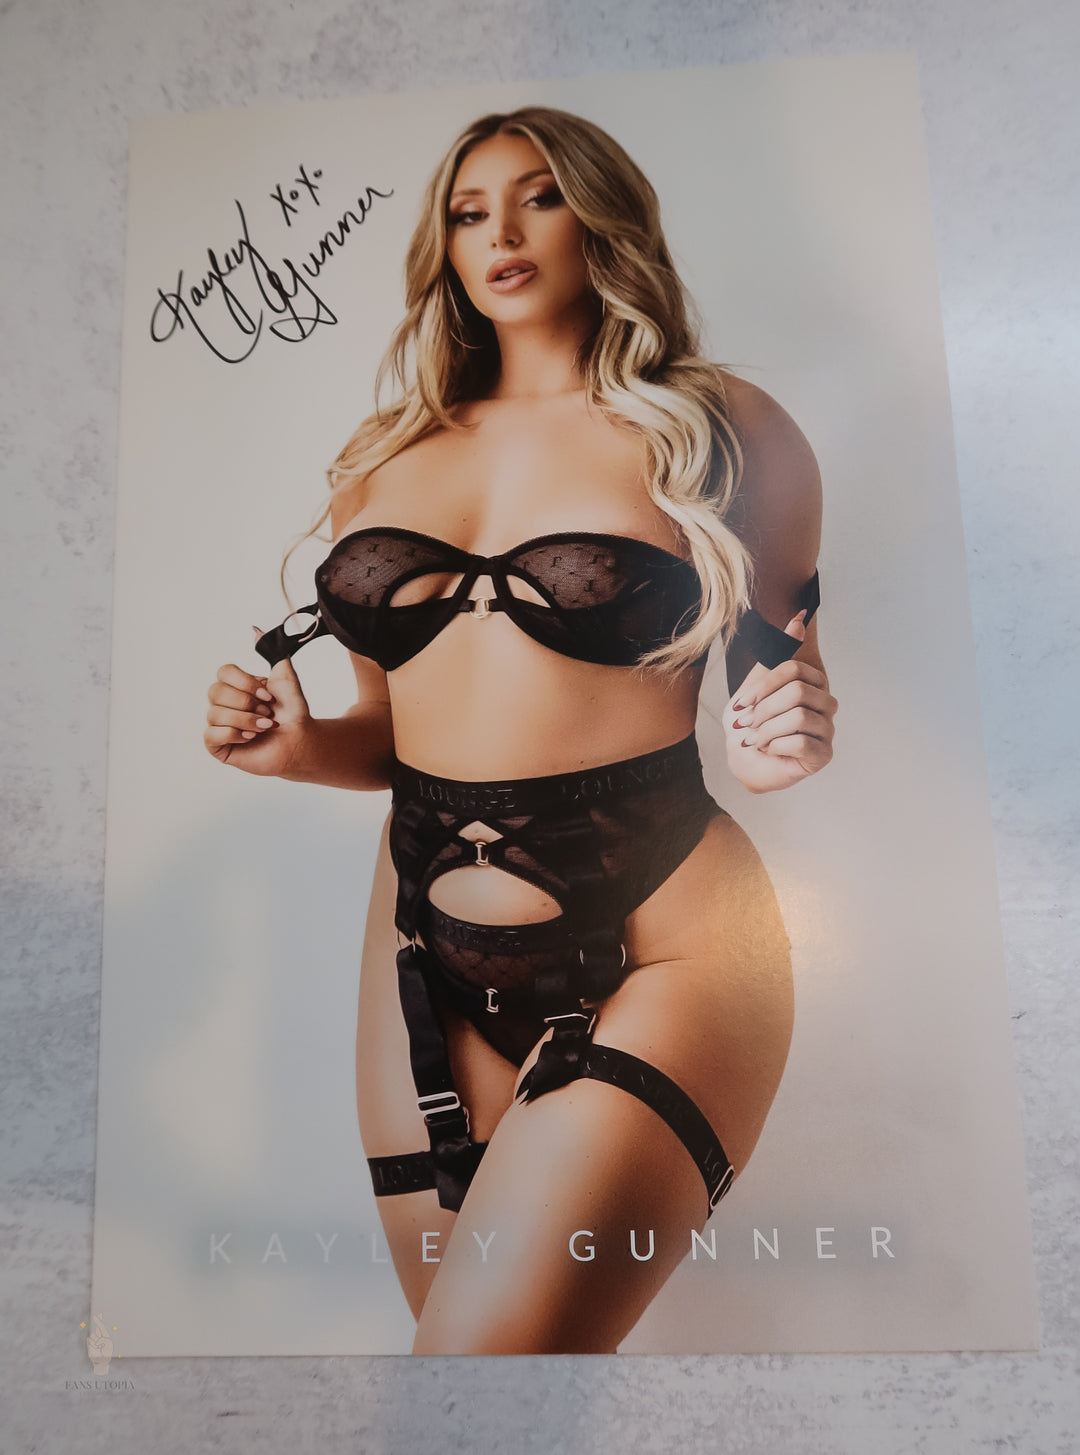 Kayley Gunner Autographed Poster 5 - Fans Utopia